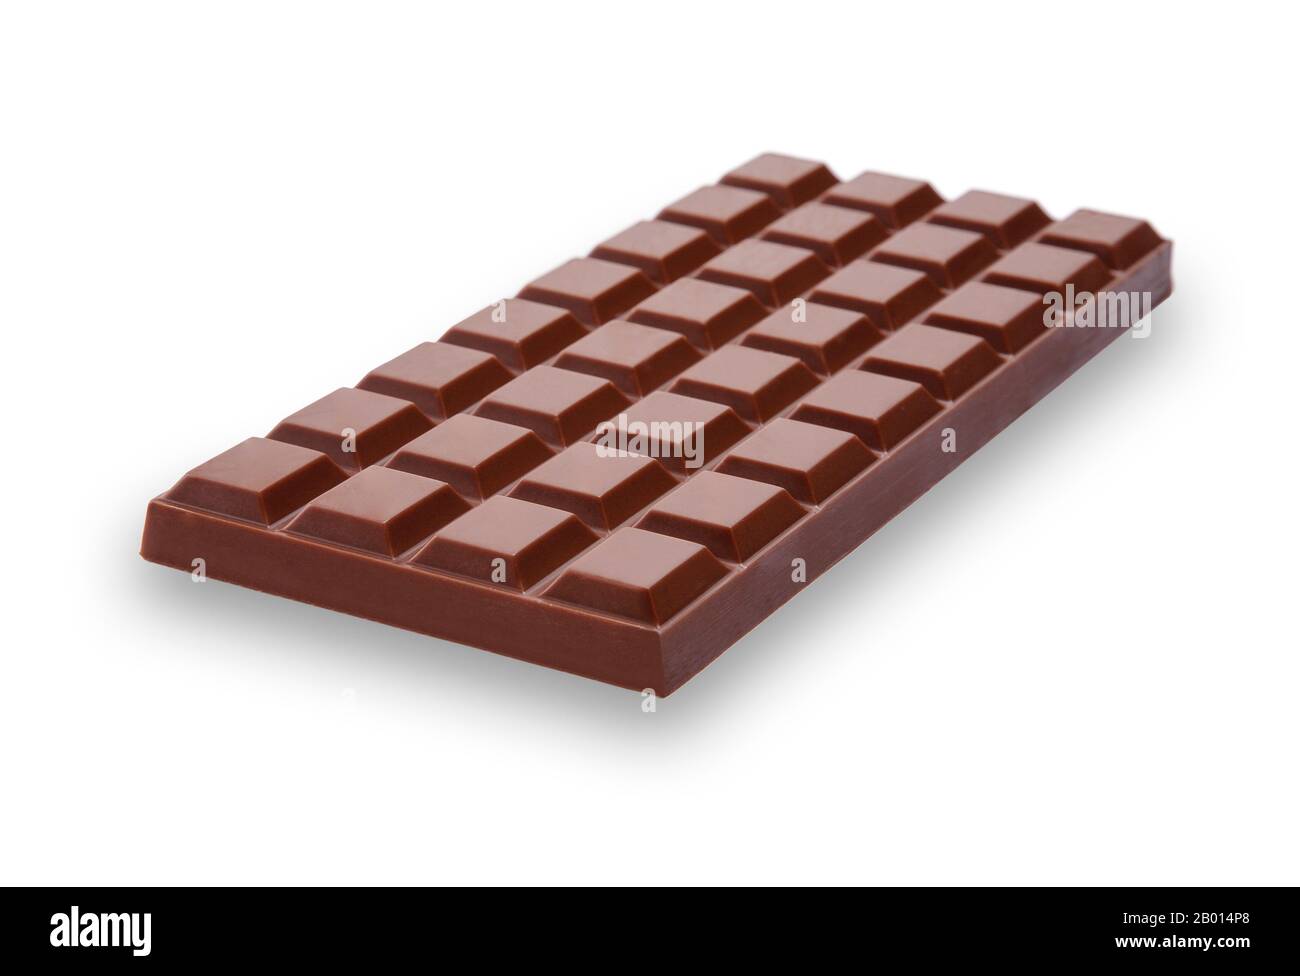 A perspective view of a bar of delicious and creamy milk chocolate, going slightly out of focus at the back, isolated on white with a drop shadow Stock Photo